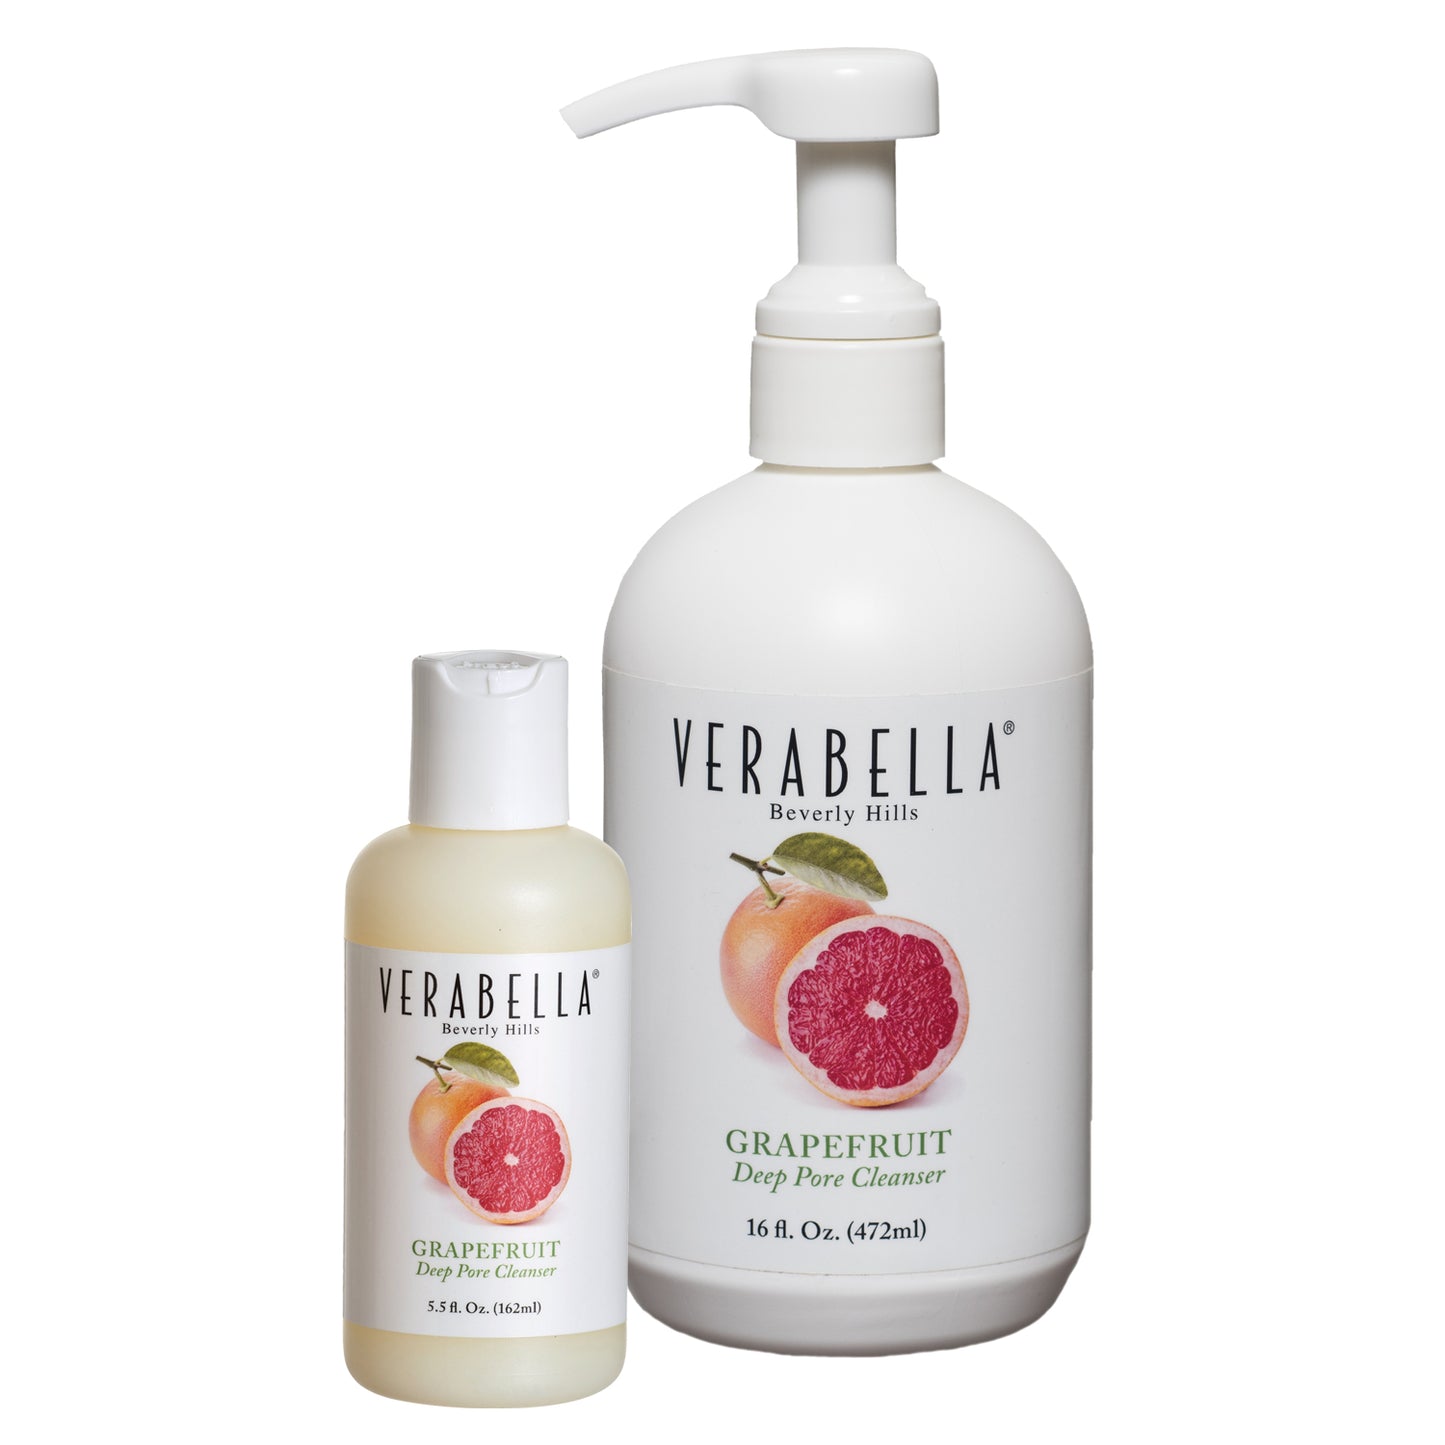 Verabella Grapefruit Deep Pore Cleanser small and large